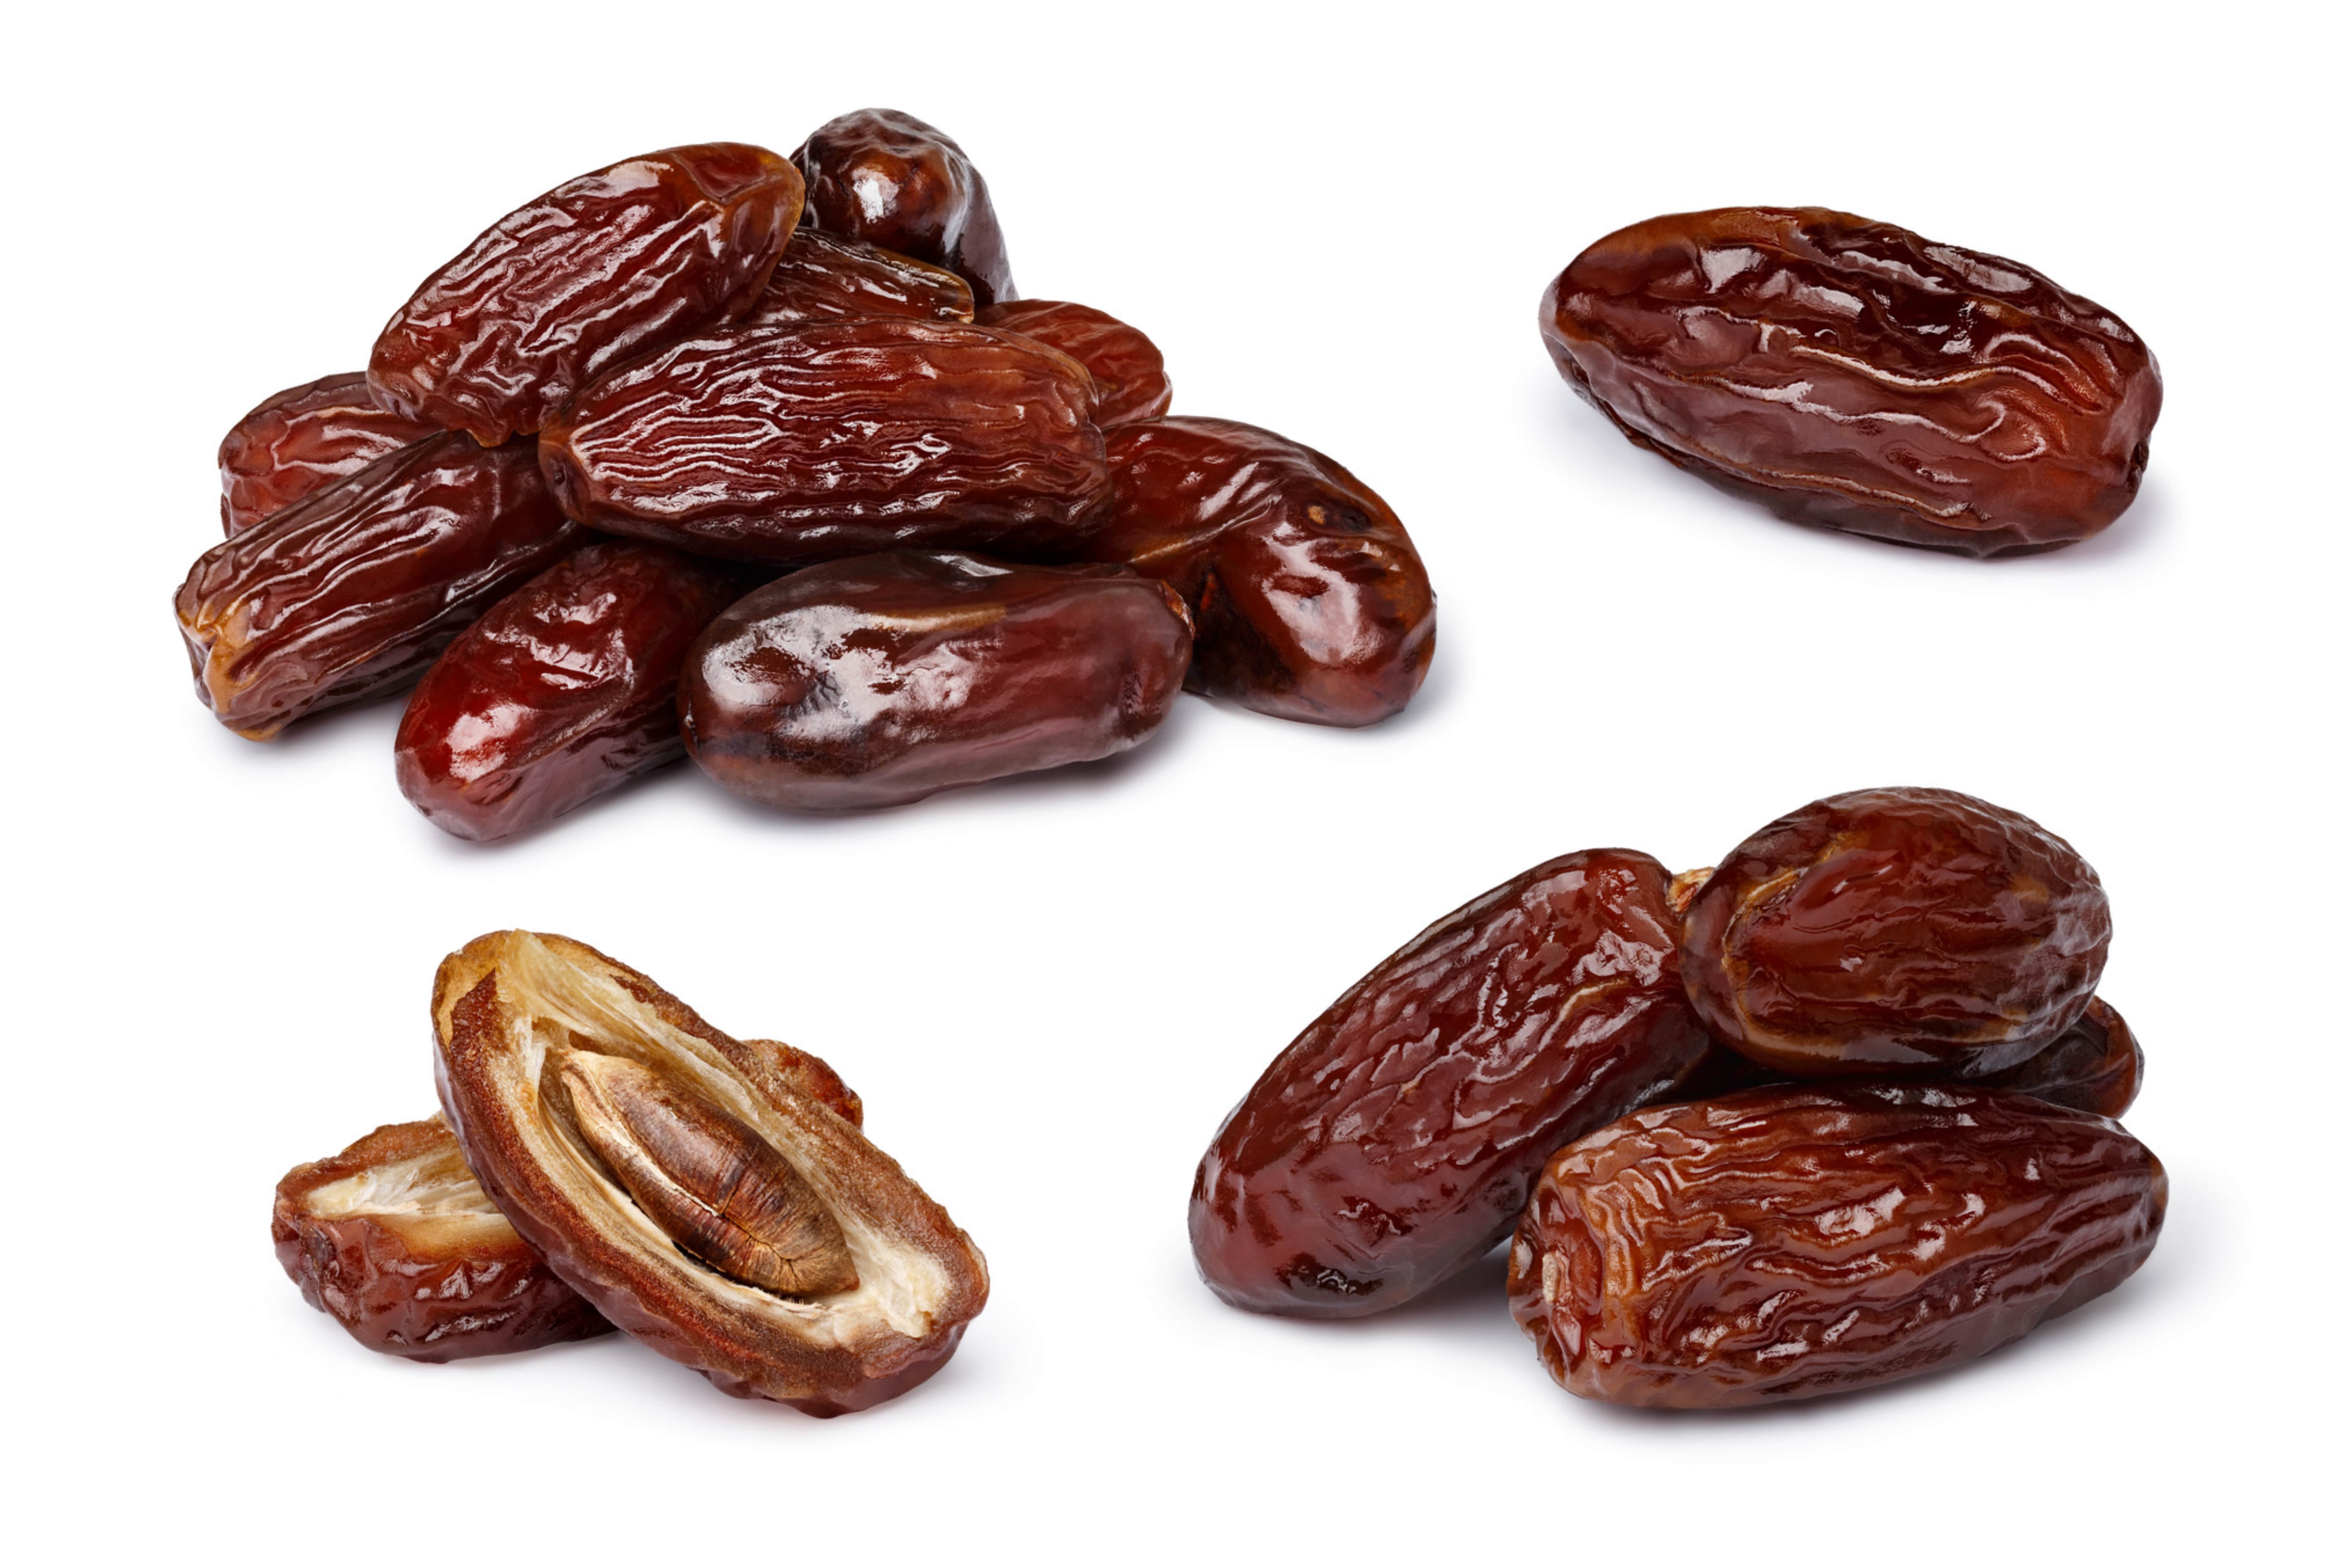 What Does a Date Taste Like